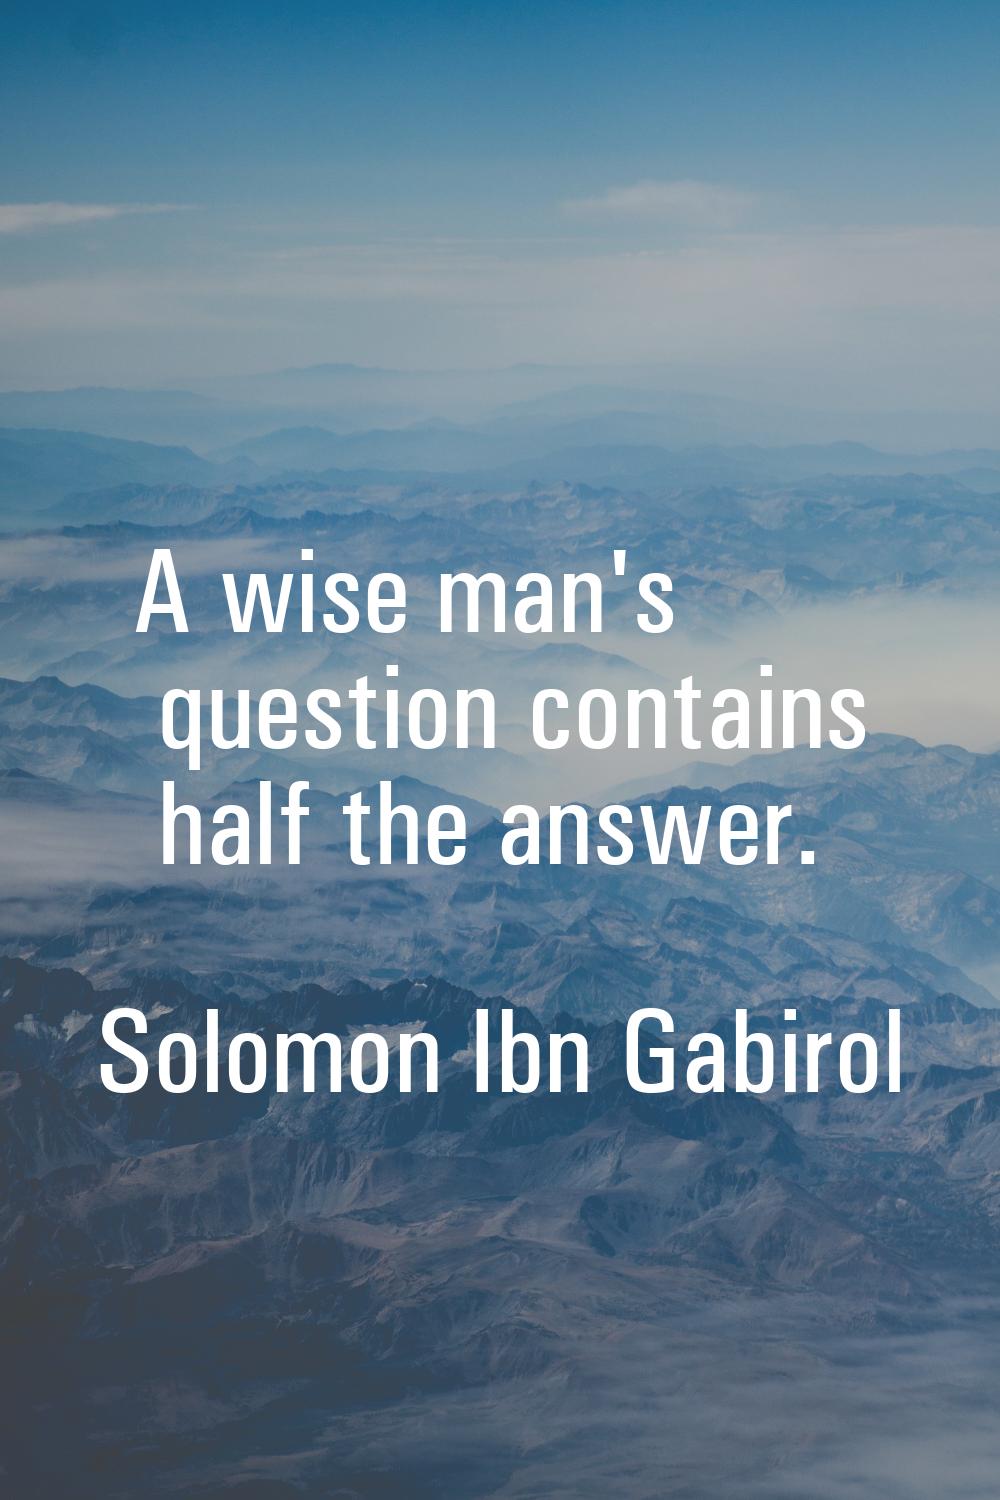 A wise man's question contains half the answer.